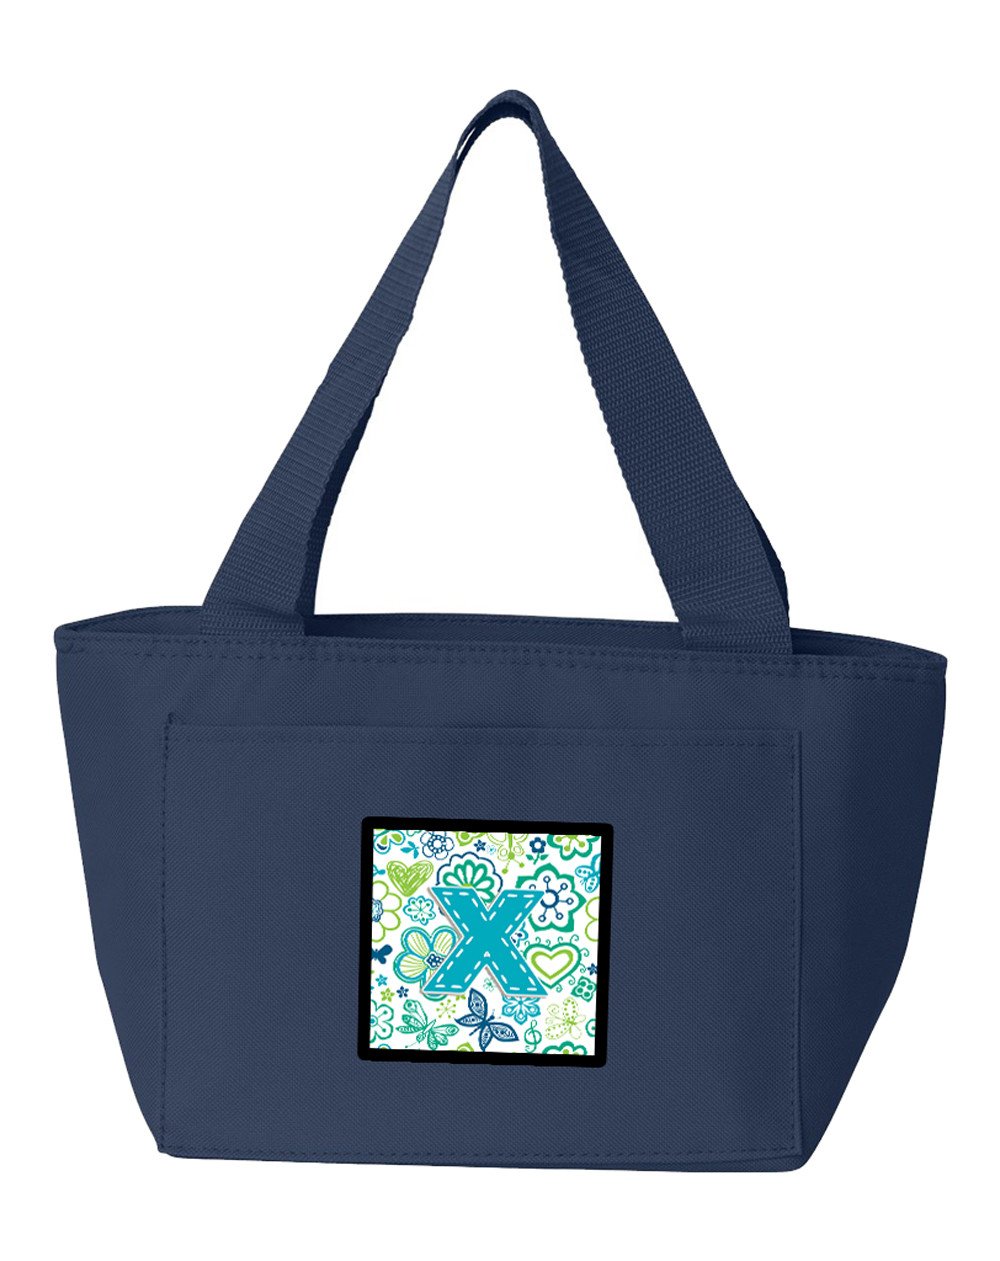 Letter X Flowers and Butterflies Teal Blue Lunch Bag CJ2006-XNA-8808 by Caroline's Treasures